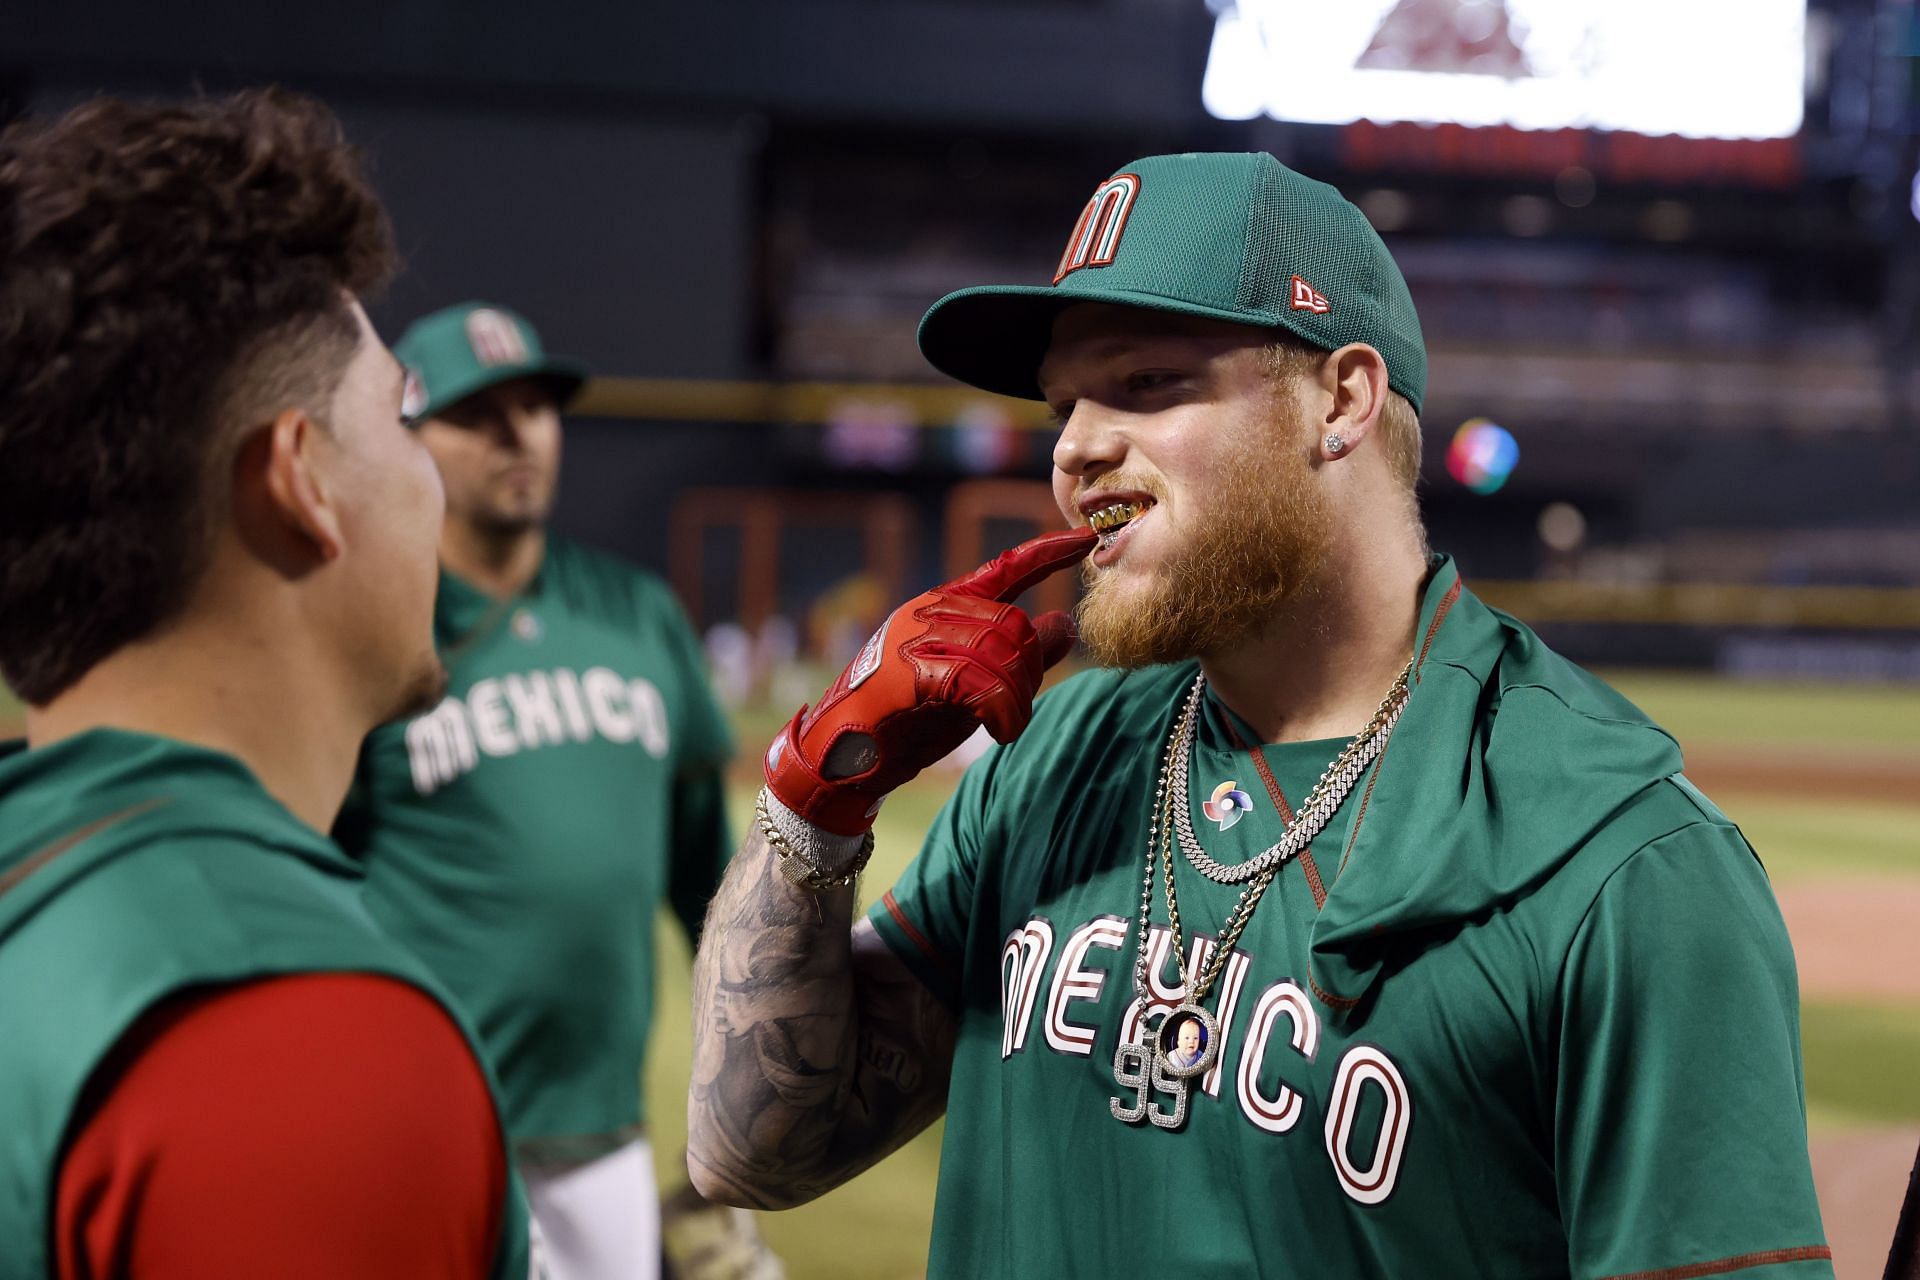 Alex Verdugo of Team Mexico reacts after hitting an RBI double in